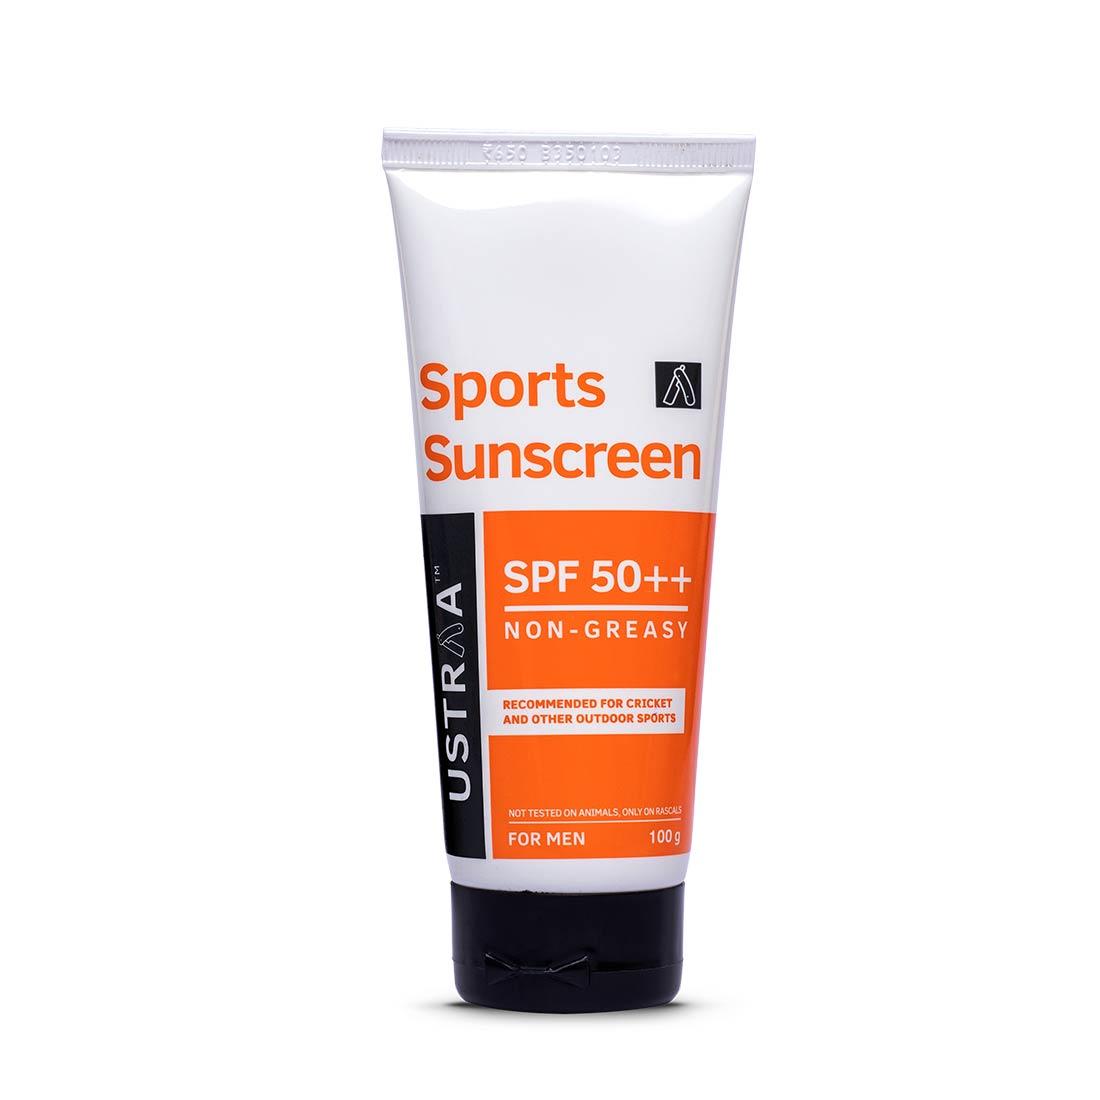 Ustraa Wash Proof Sports Sunscreen for Men SPF 50++ with Zinc to Prevent Tanning, 100g